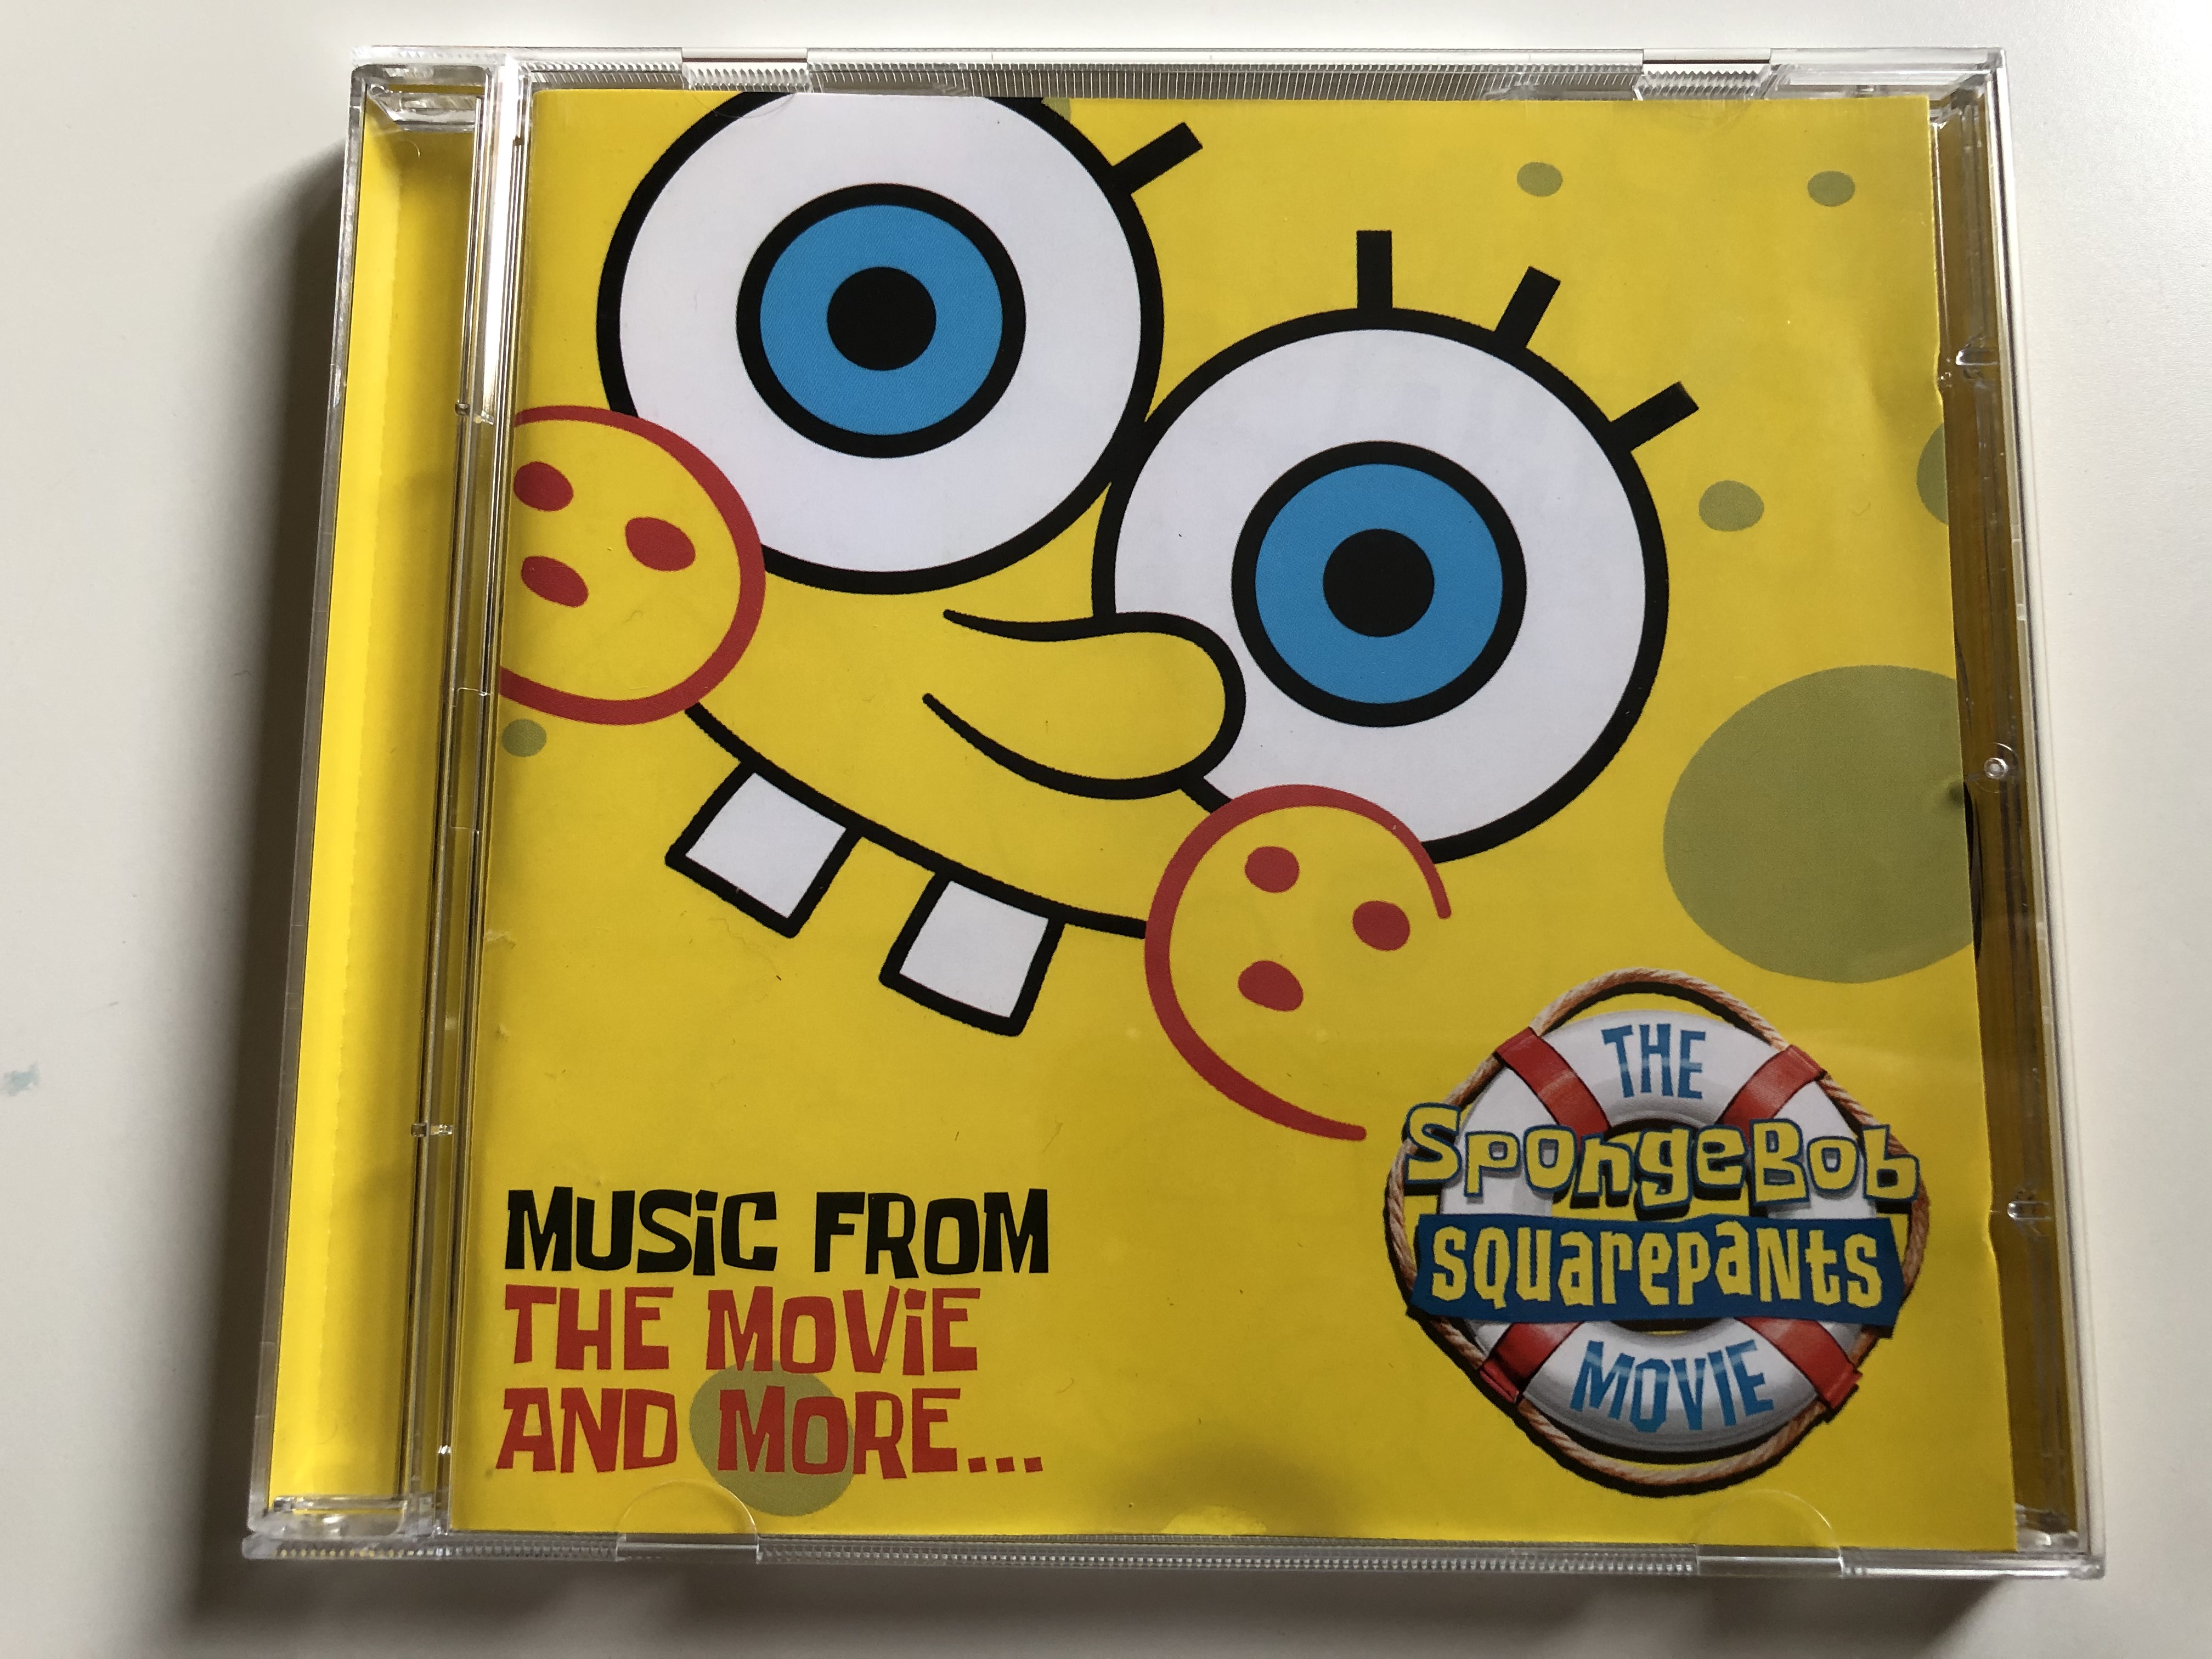 The SpongeBob SquarePants Movie (Music From The Movie And More...) / Sire  ‎Audio CD 2004 / 9362-48888-2 - Bible in My Language